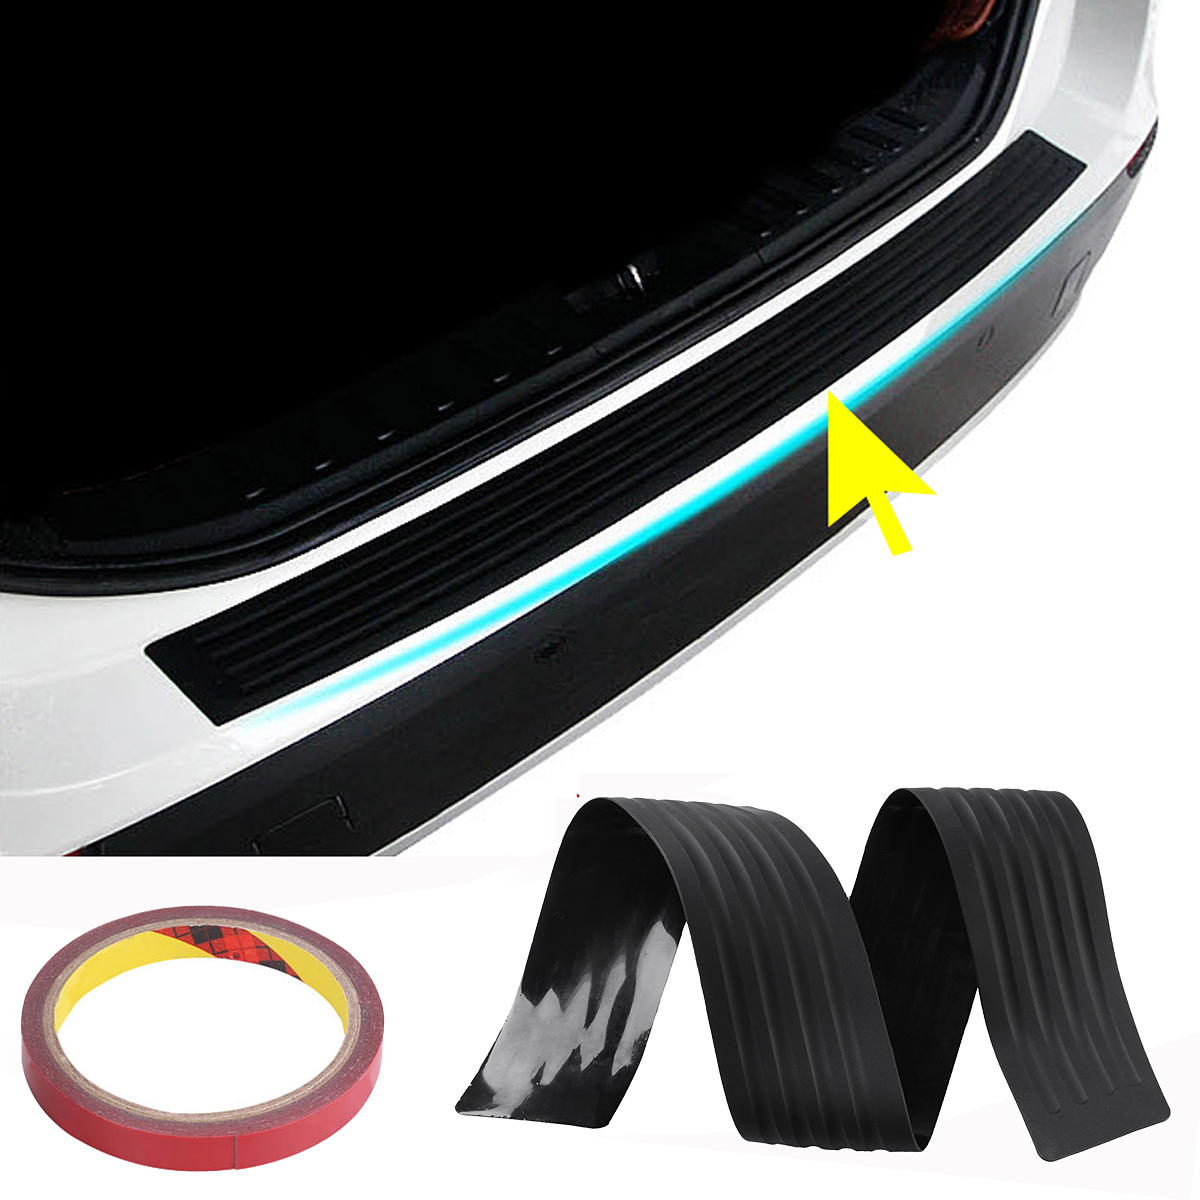 104 cm PVC Rubber Achterbumper Sill Protector Plaat Cover Guard Pad Molding voor VW / Audi / BMW SUV